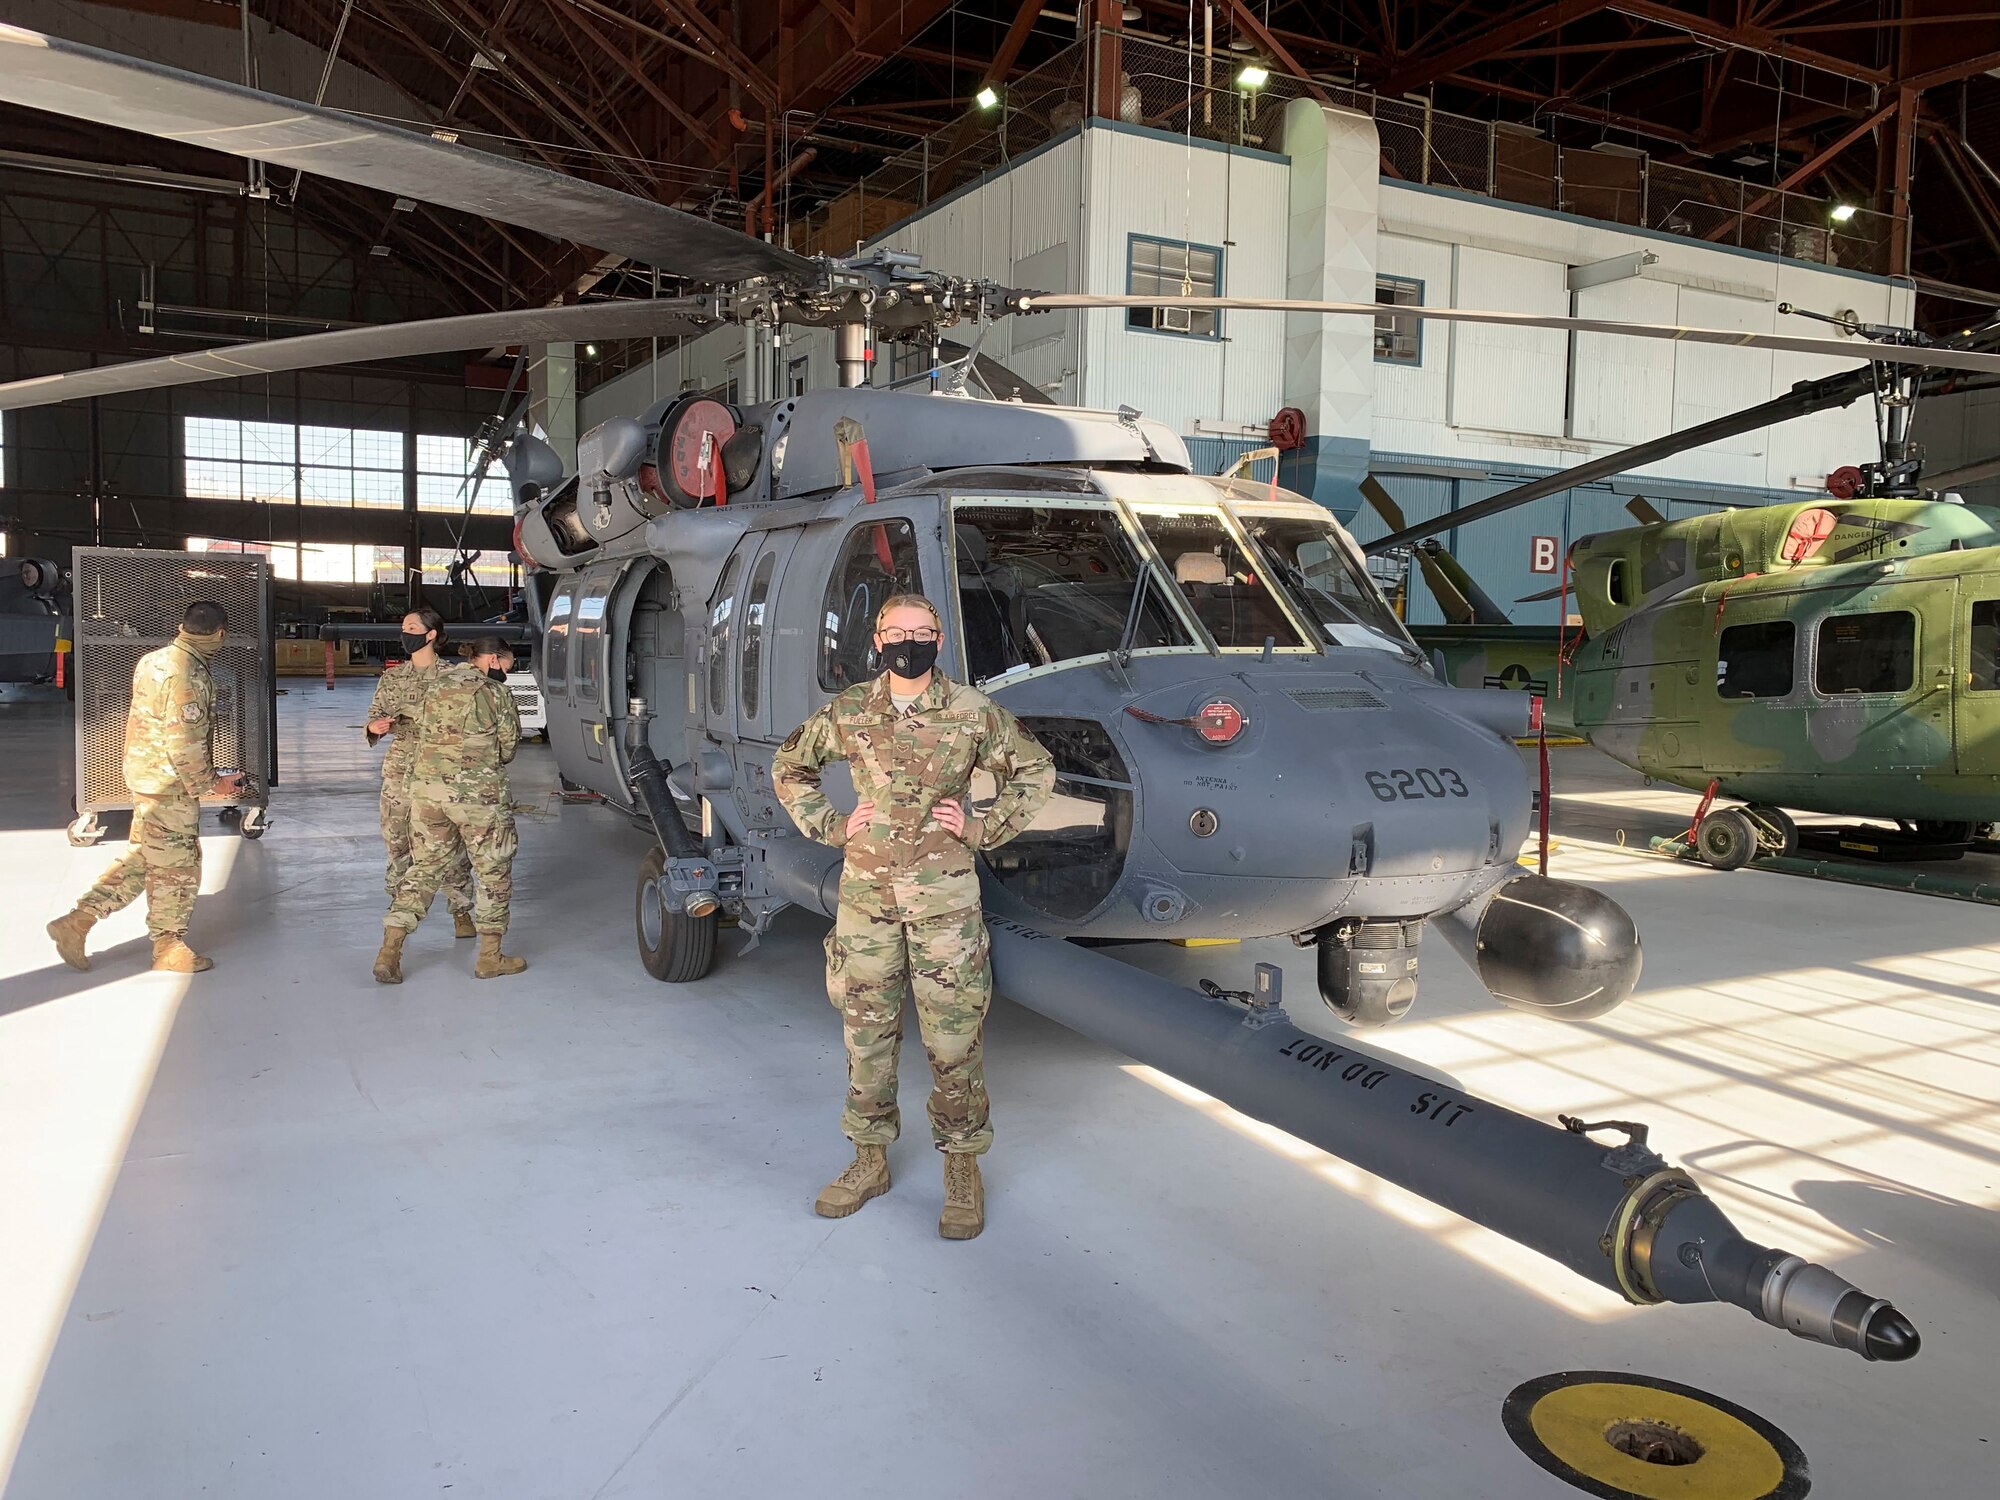 Senior Airman Selina Fuller, center, 68th Rescue Squadron rescue intelligence analyst, poses for a photo in front of an HH-60 Pave Hawk at Davis-Monthan Air Force Base, Arizona.